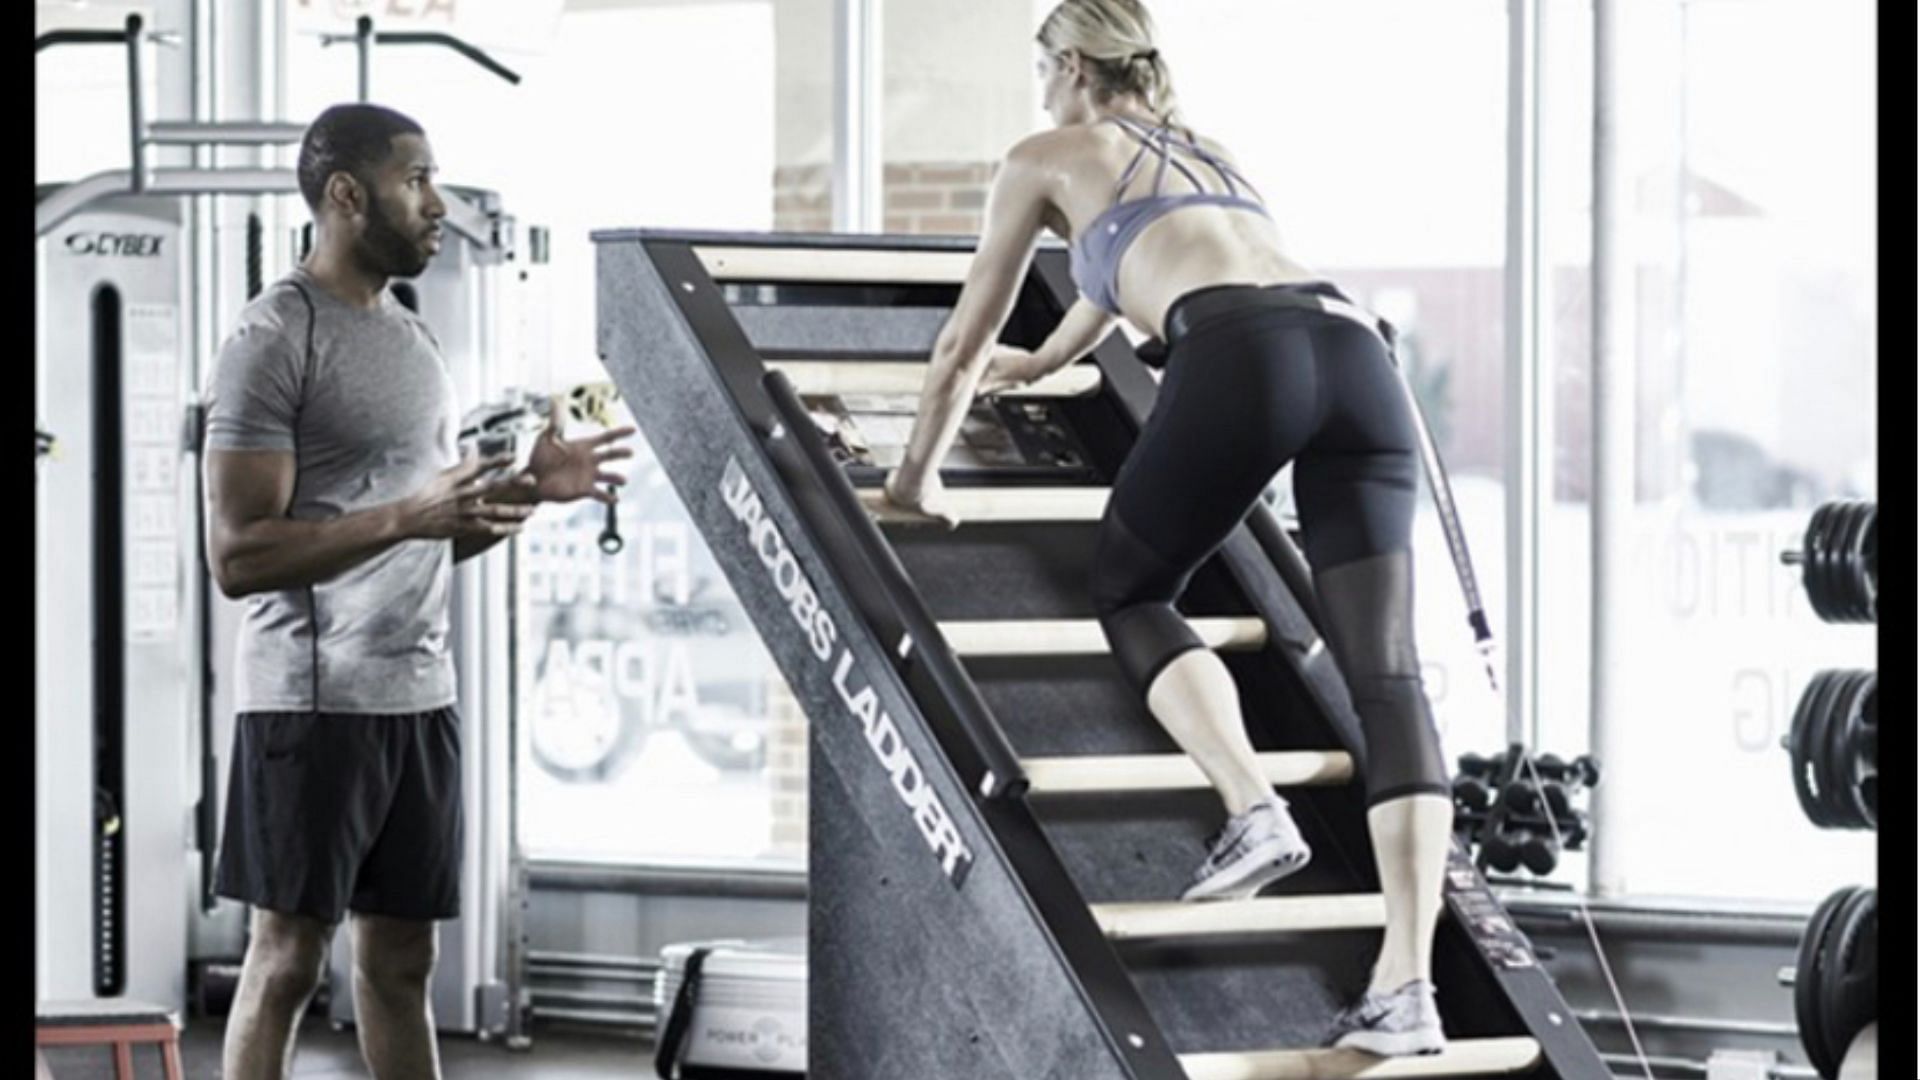 The Jacobs ladder machine can be used by beginners and advanced exercisers alike. (Photo via Instagram/novofitaus)